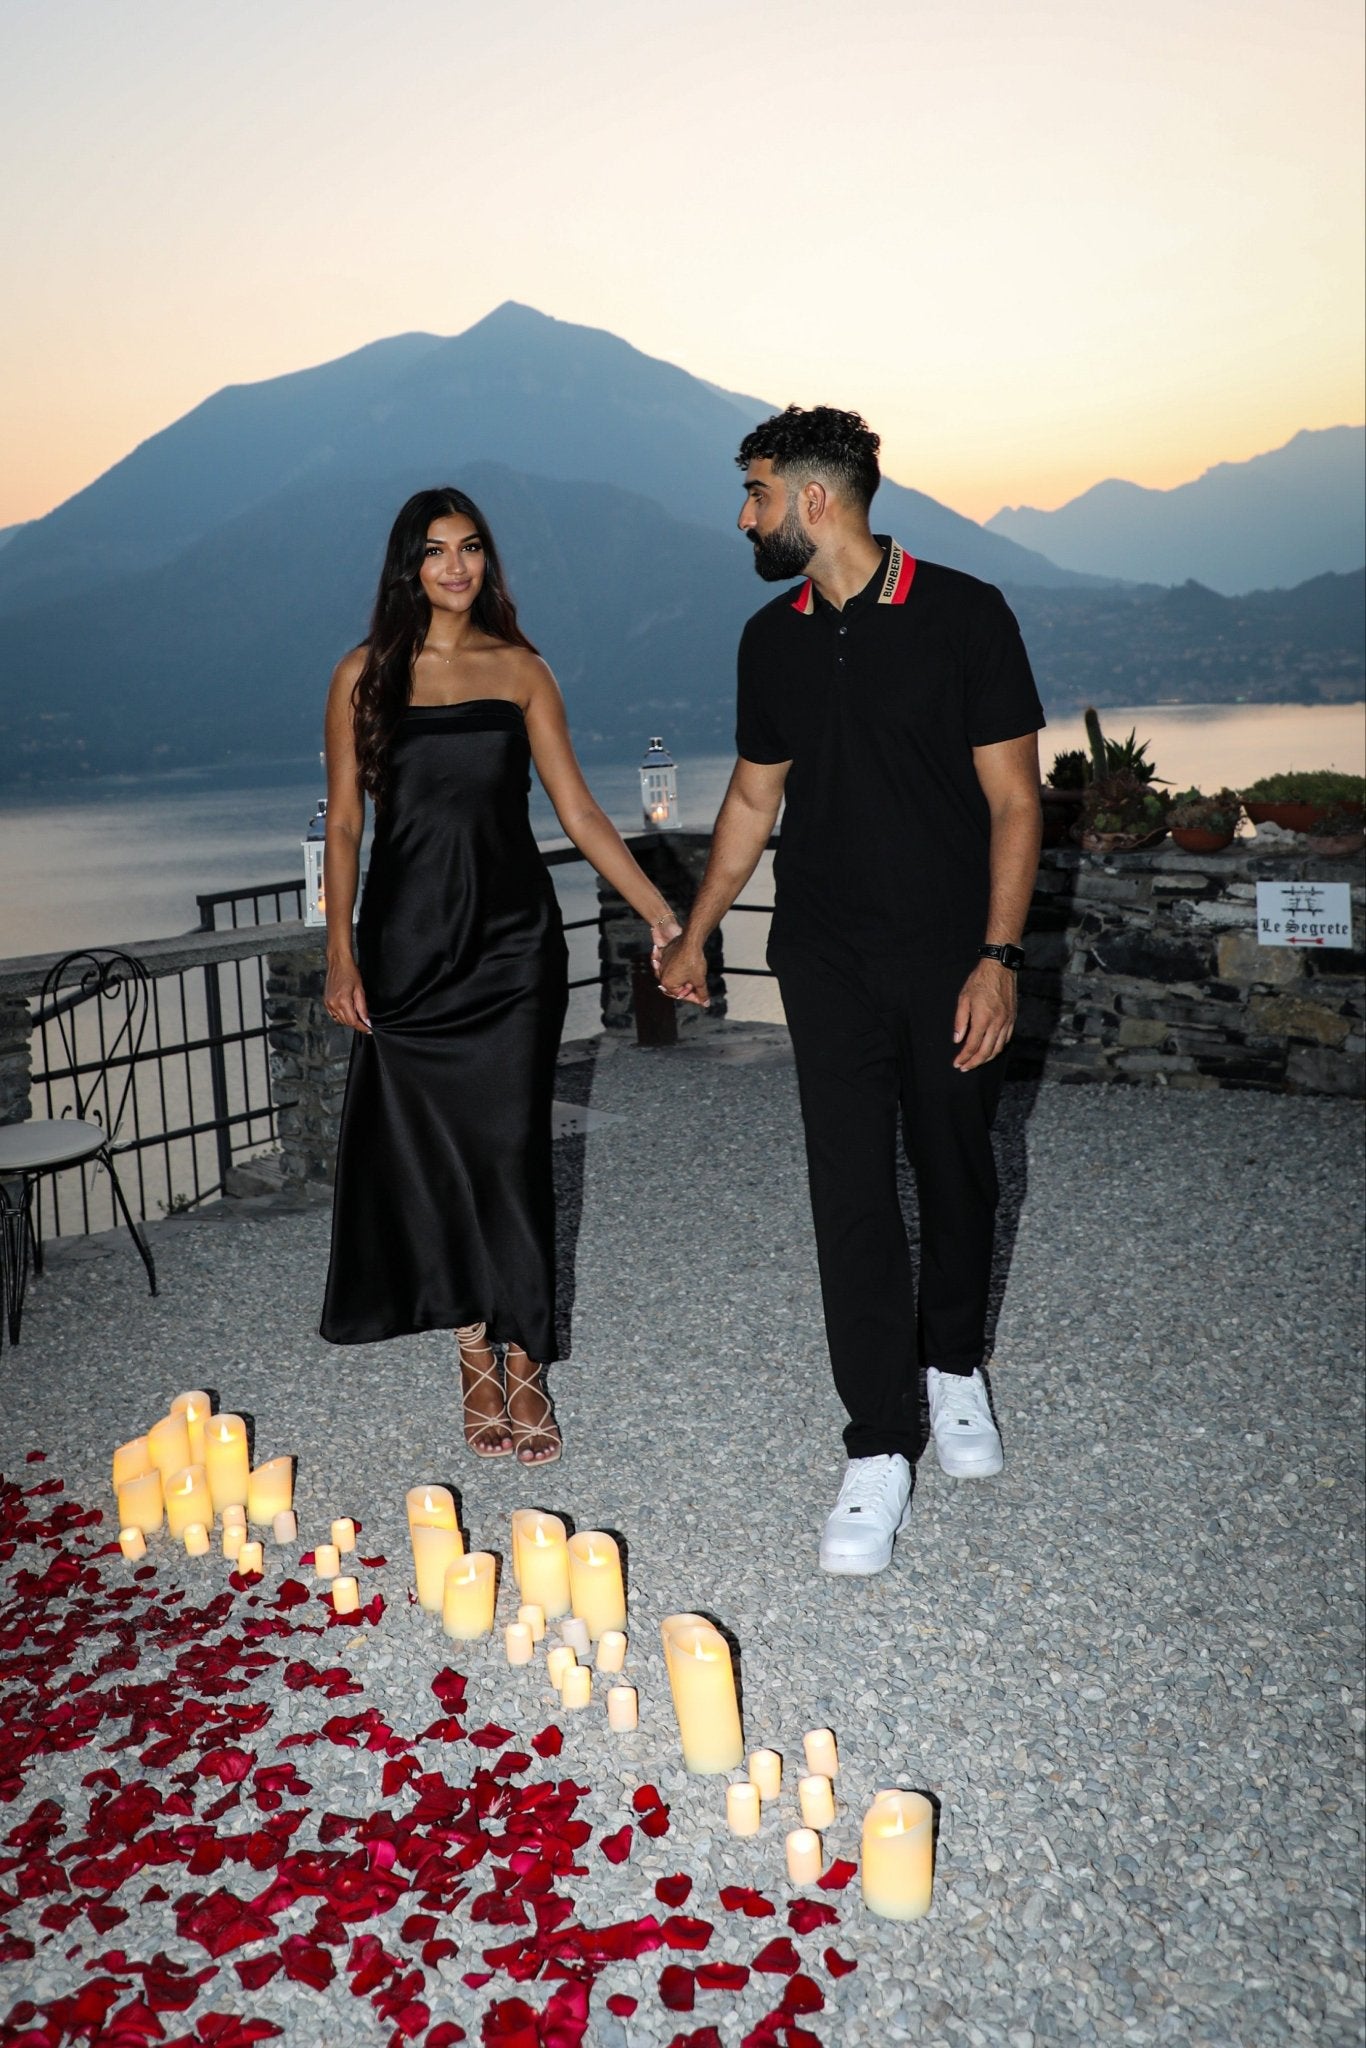 Proposal Photo Shoot at Castello di Vezio with Flowers, Food and Music